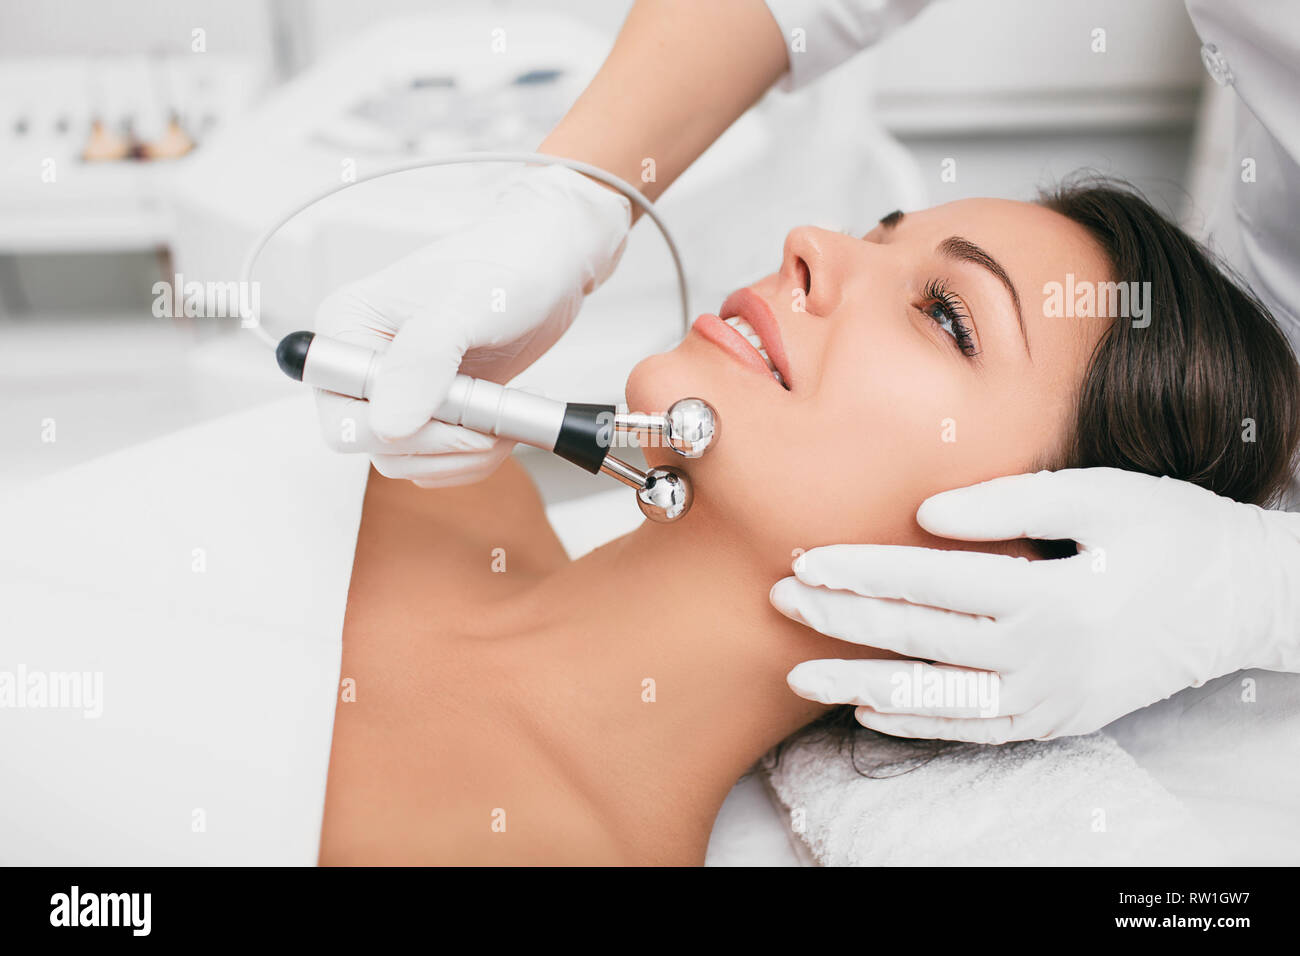 Beautiful woman receiving facial microcurrent procedure for lifting face. facial rejuvenation and facelift with microcurrent therapy Stock Photo